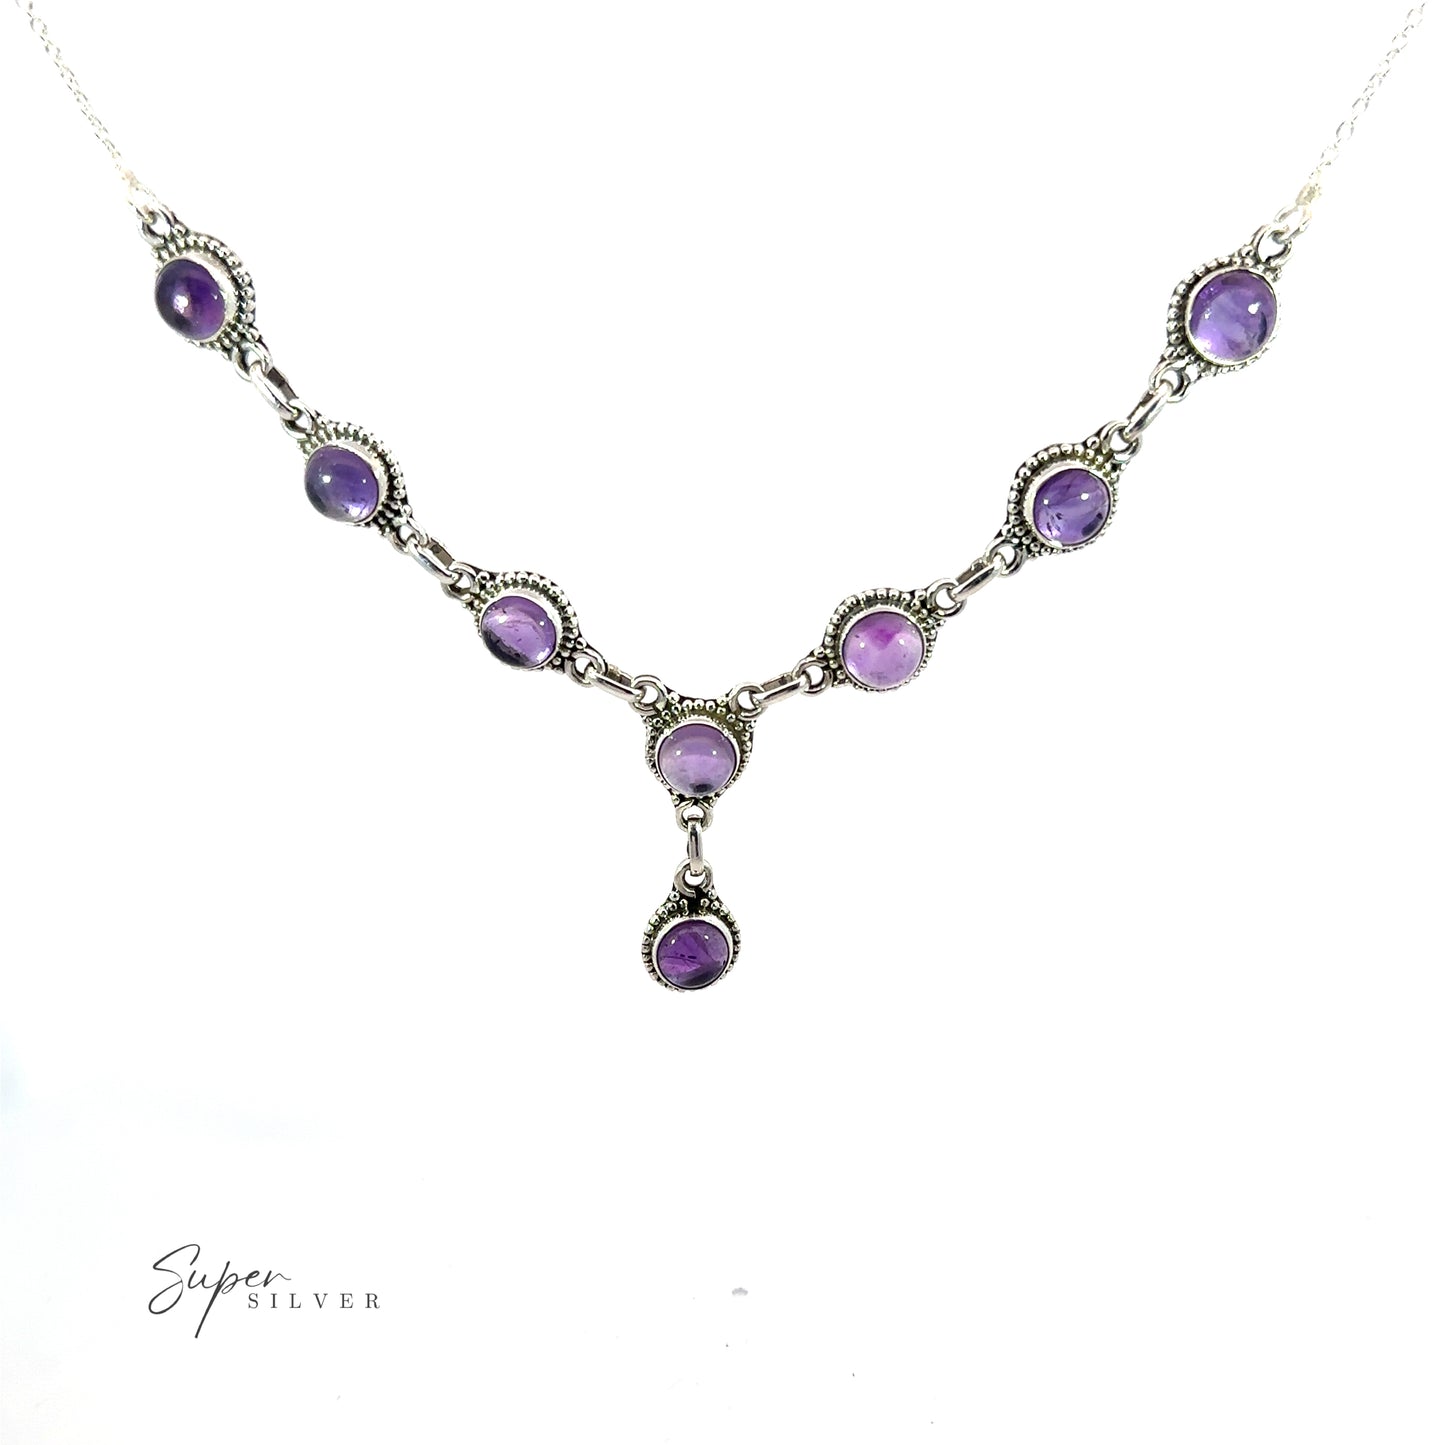 
                  
                    A Round Gemstone Y Necklace with Ball Border necklace with a series of round, purple gemstone pendants set in intricate silver settings, featuring one drop-shaped pendant at its center. This exquisite piece of bohemian style jewelry is branded "Super Silver" in the bottom left corner.
                  
                